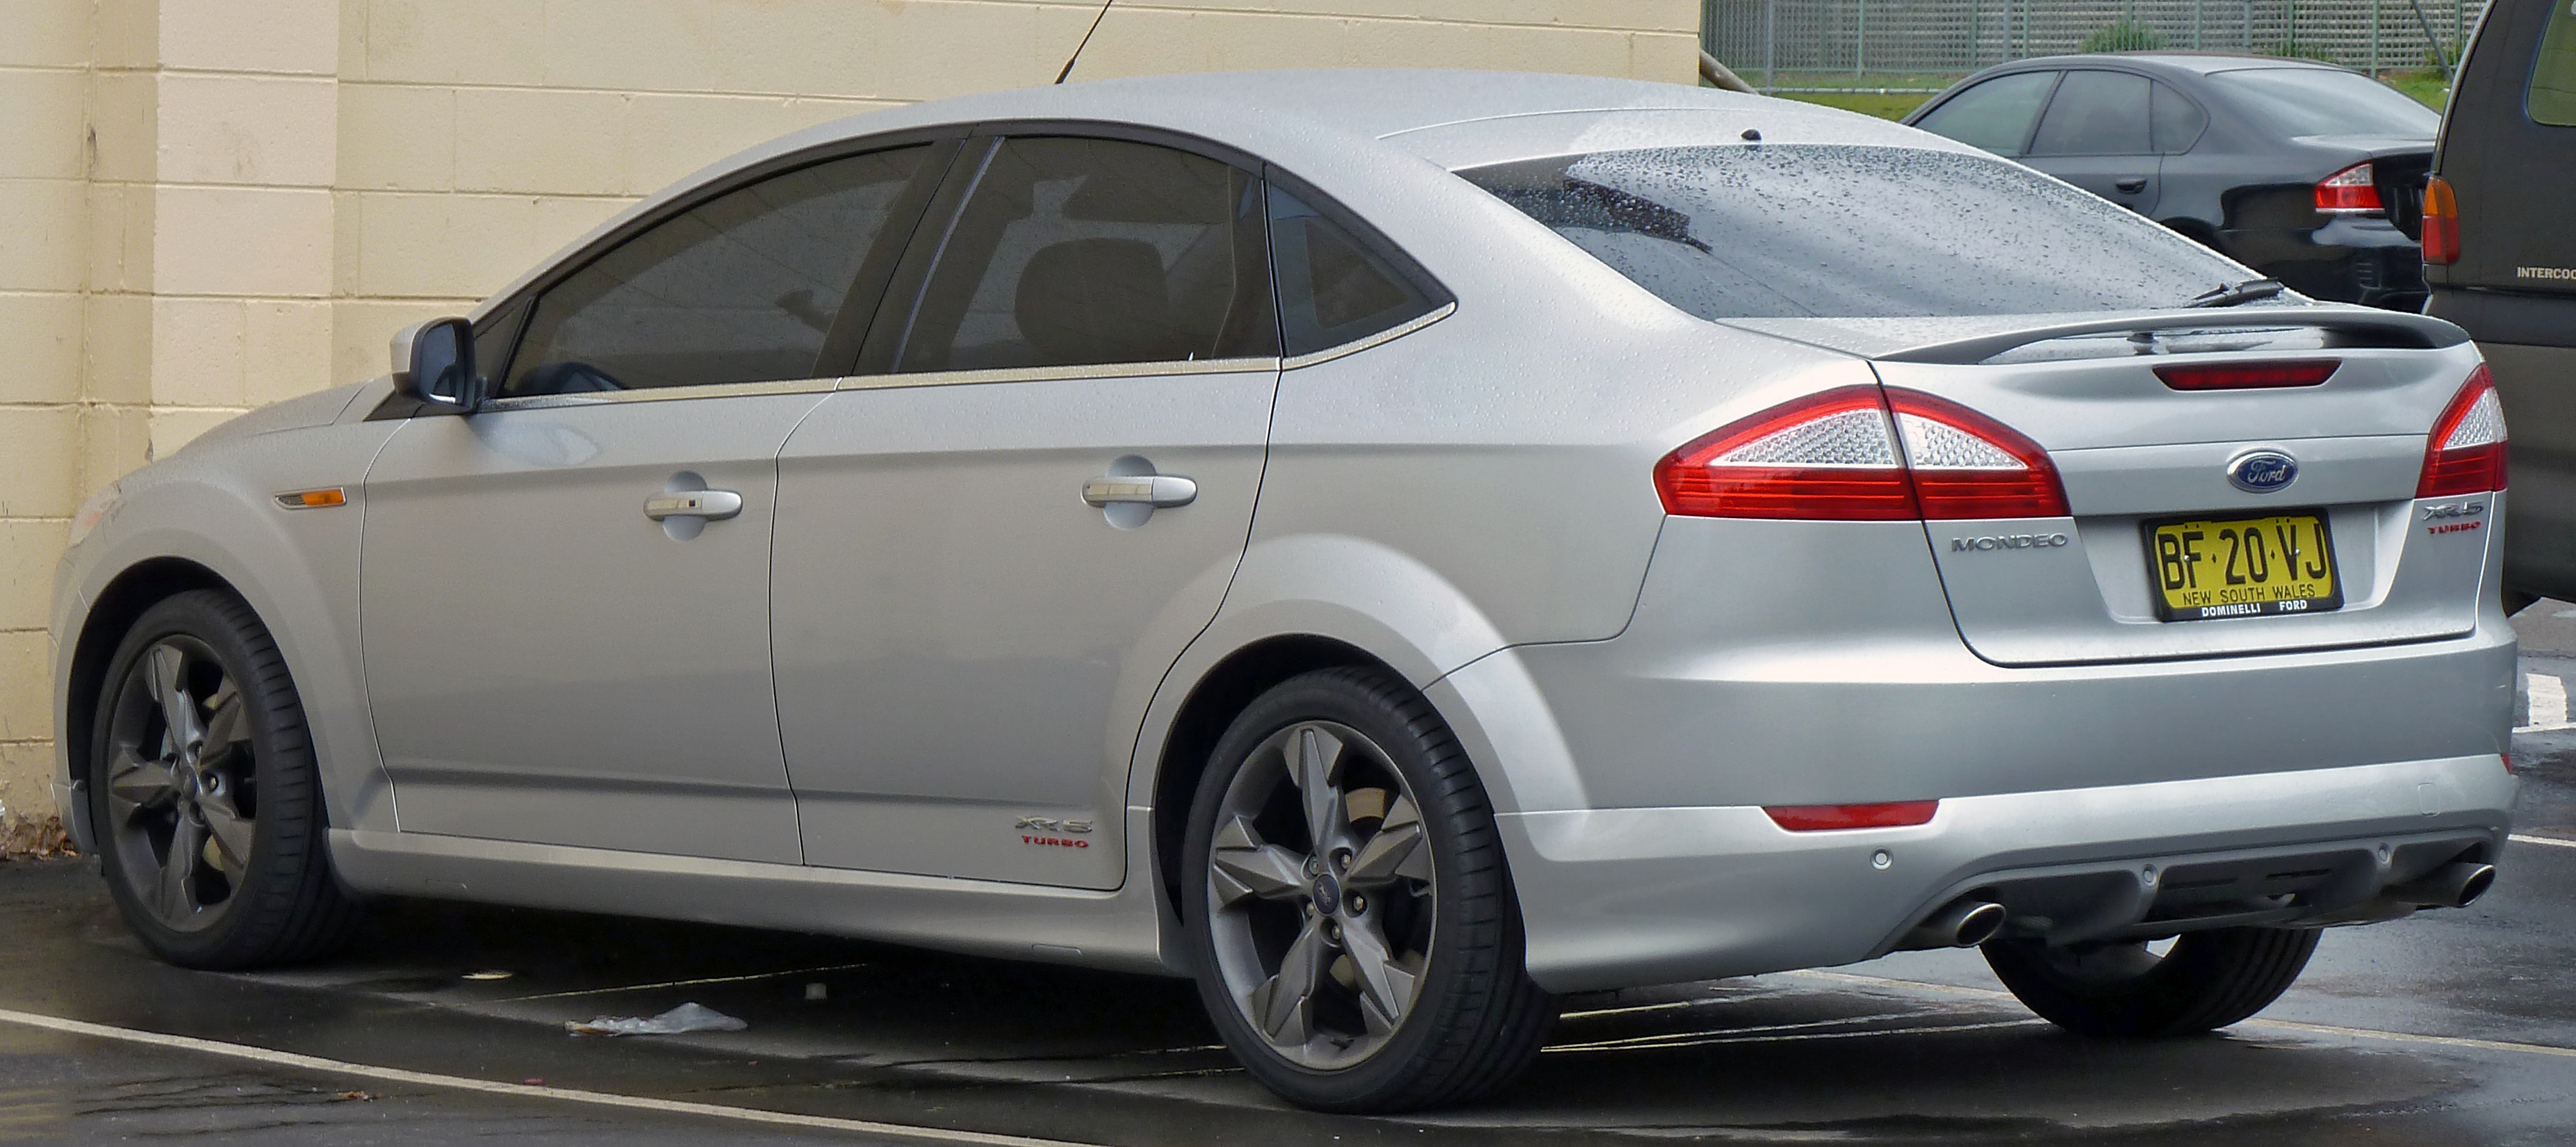 Ford Mondeo (MB) 01.jpg - Wikimedia Commons